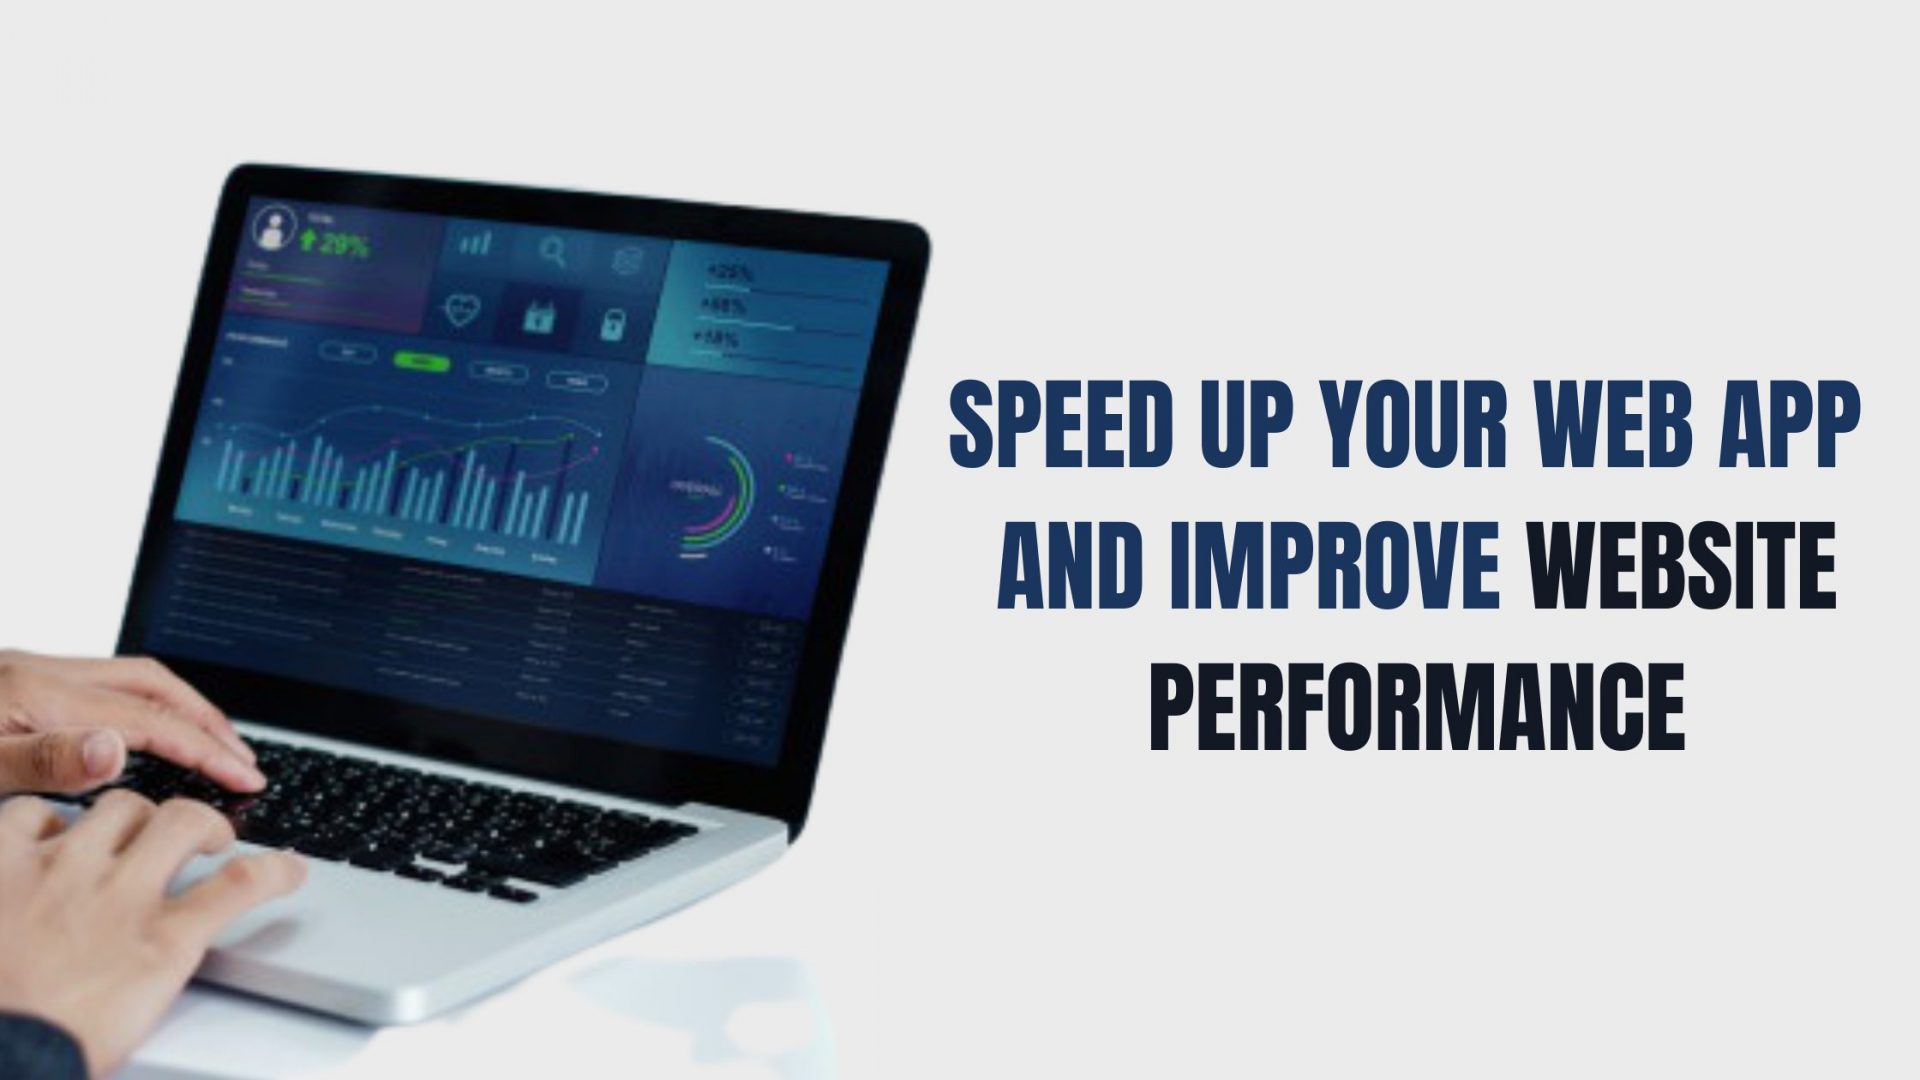 Speed Up Your Web App and Improve Website Performance